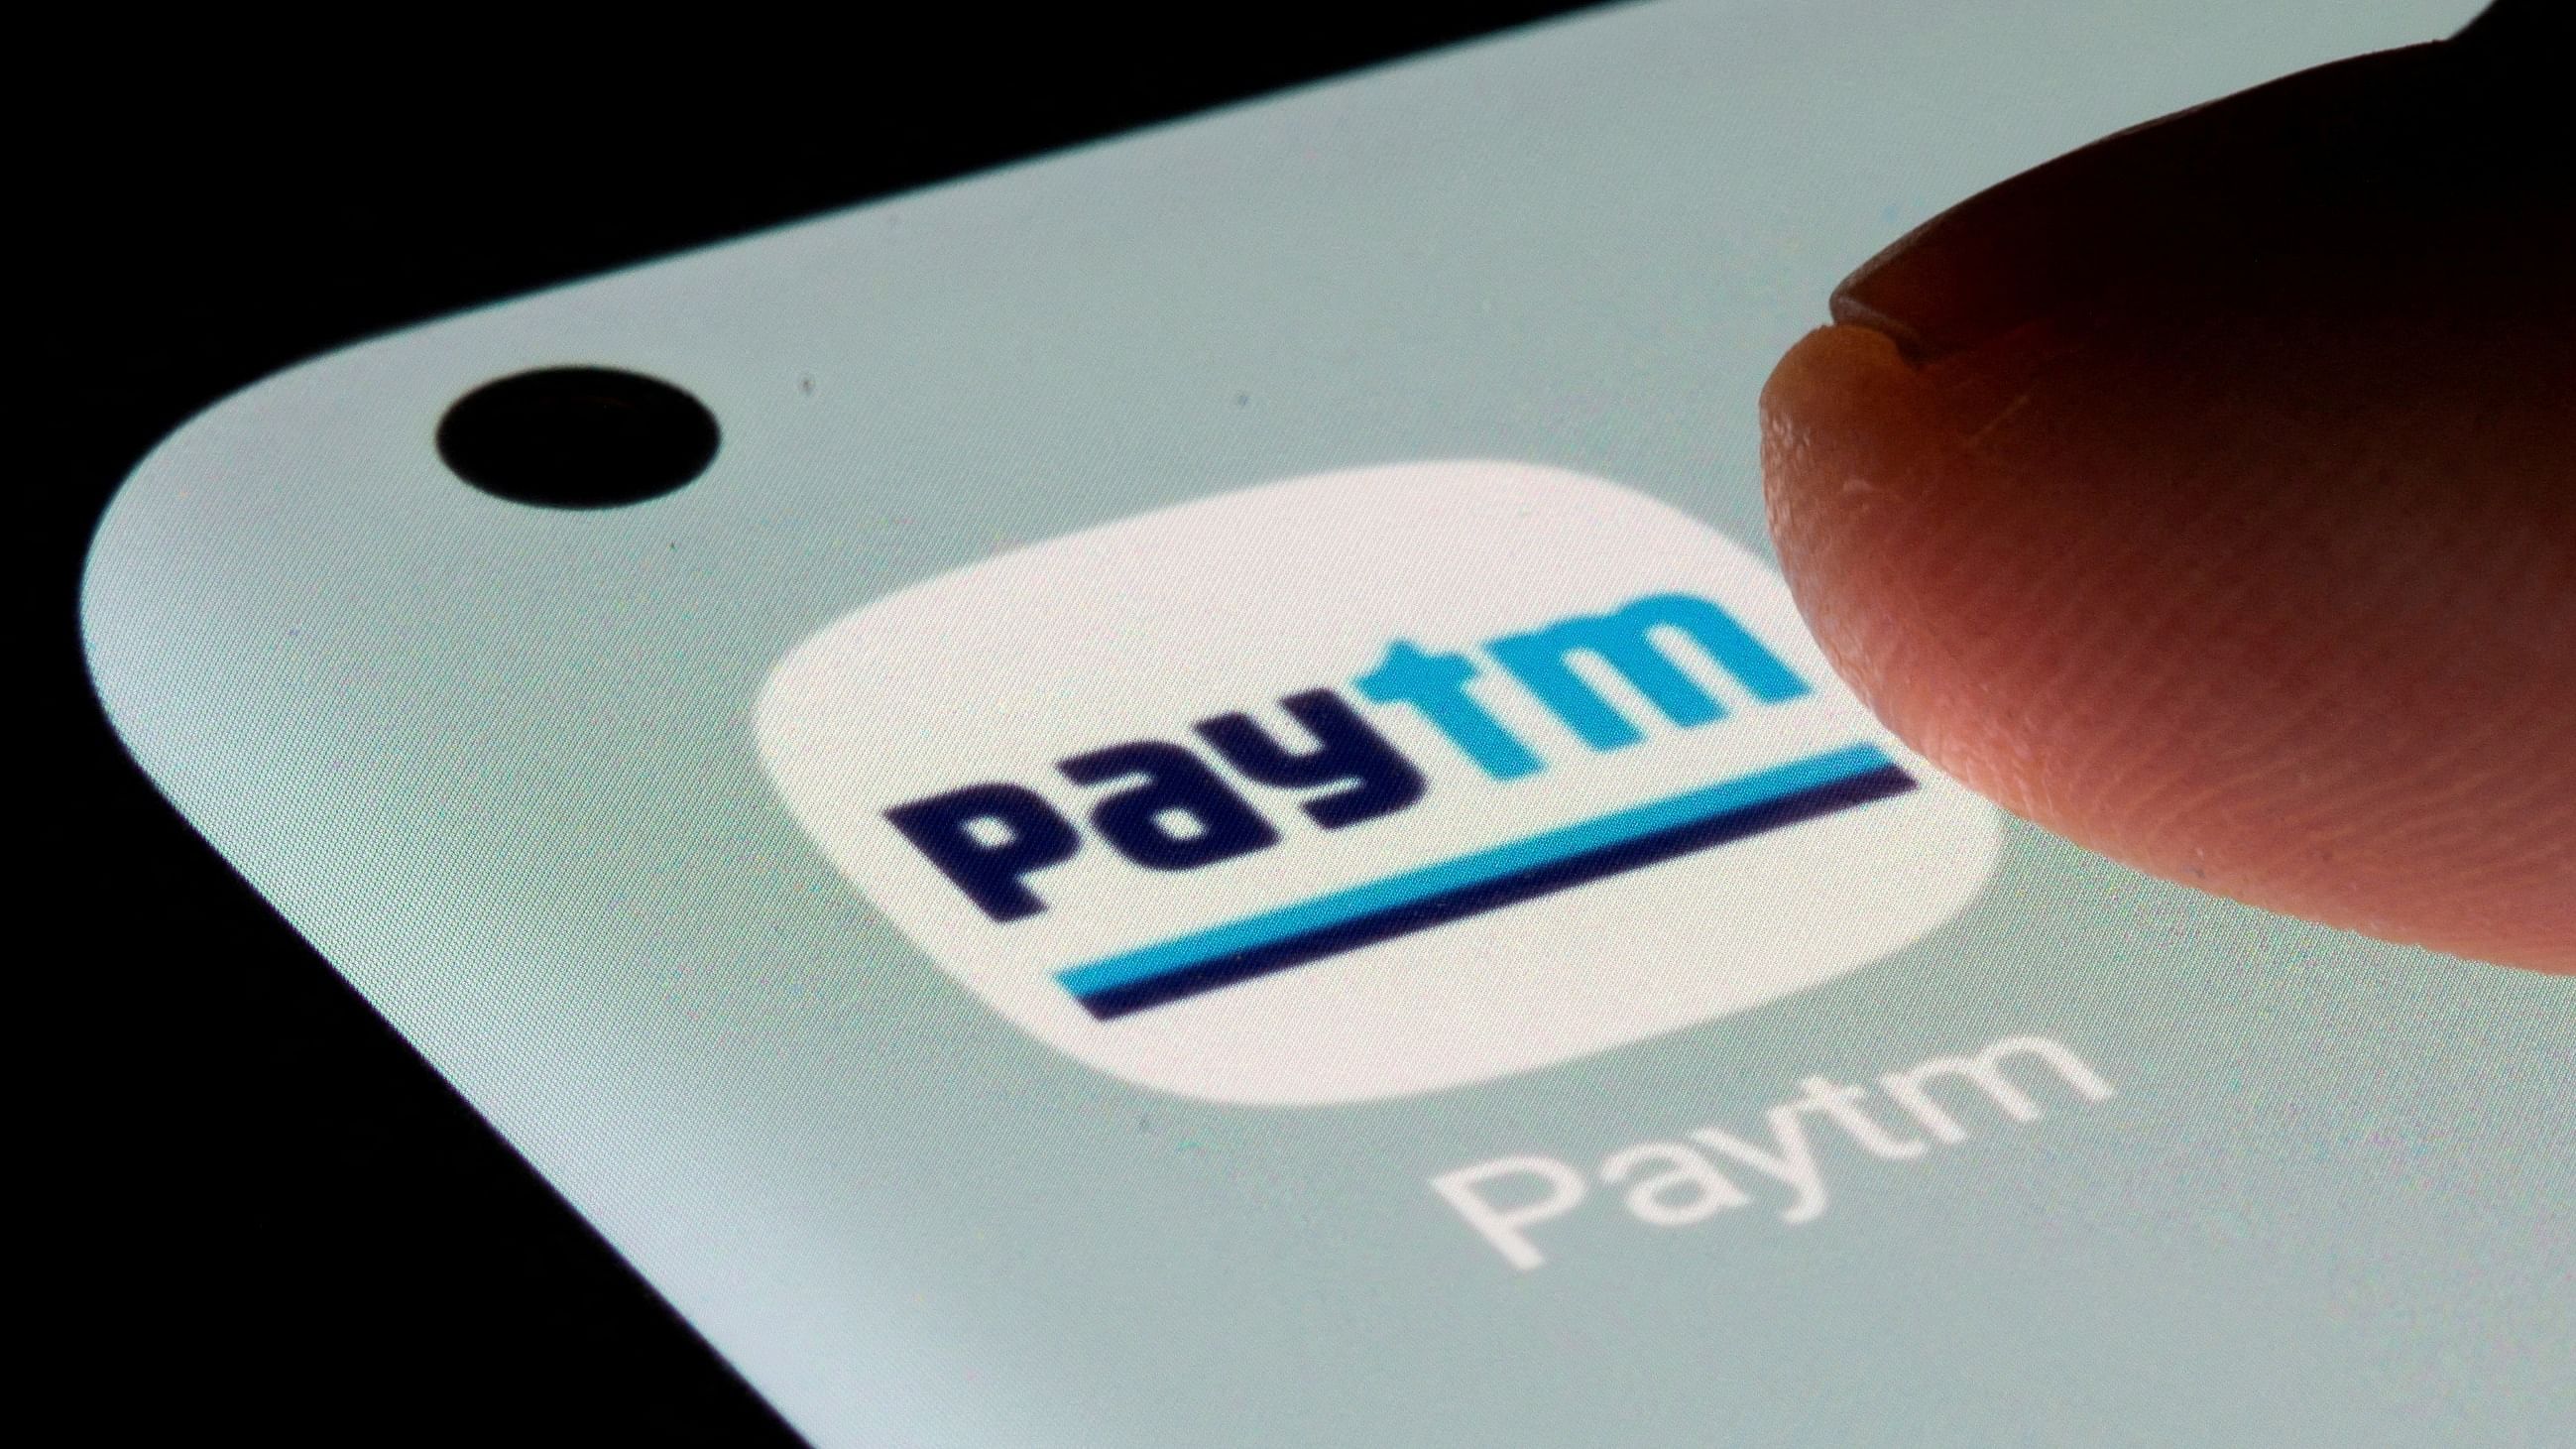 Paytm, which competes with Google's payment app and Walmart Inc's PhonePe in India's digital payments market, said it is on track to achieve operational profitability by September 2023. Credit: Reuters File Photo